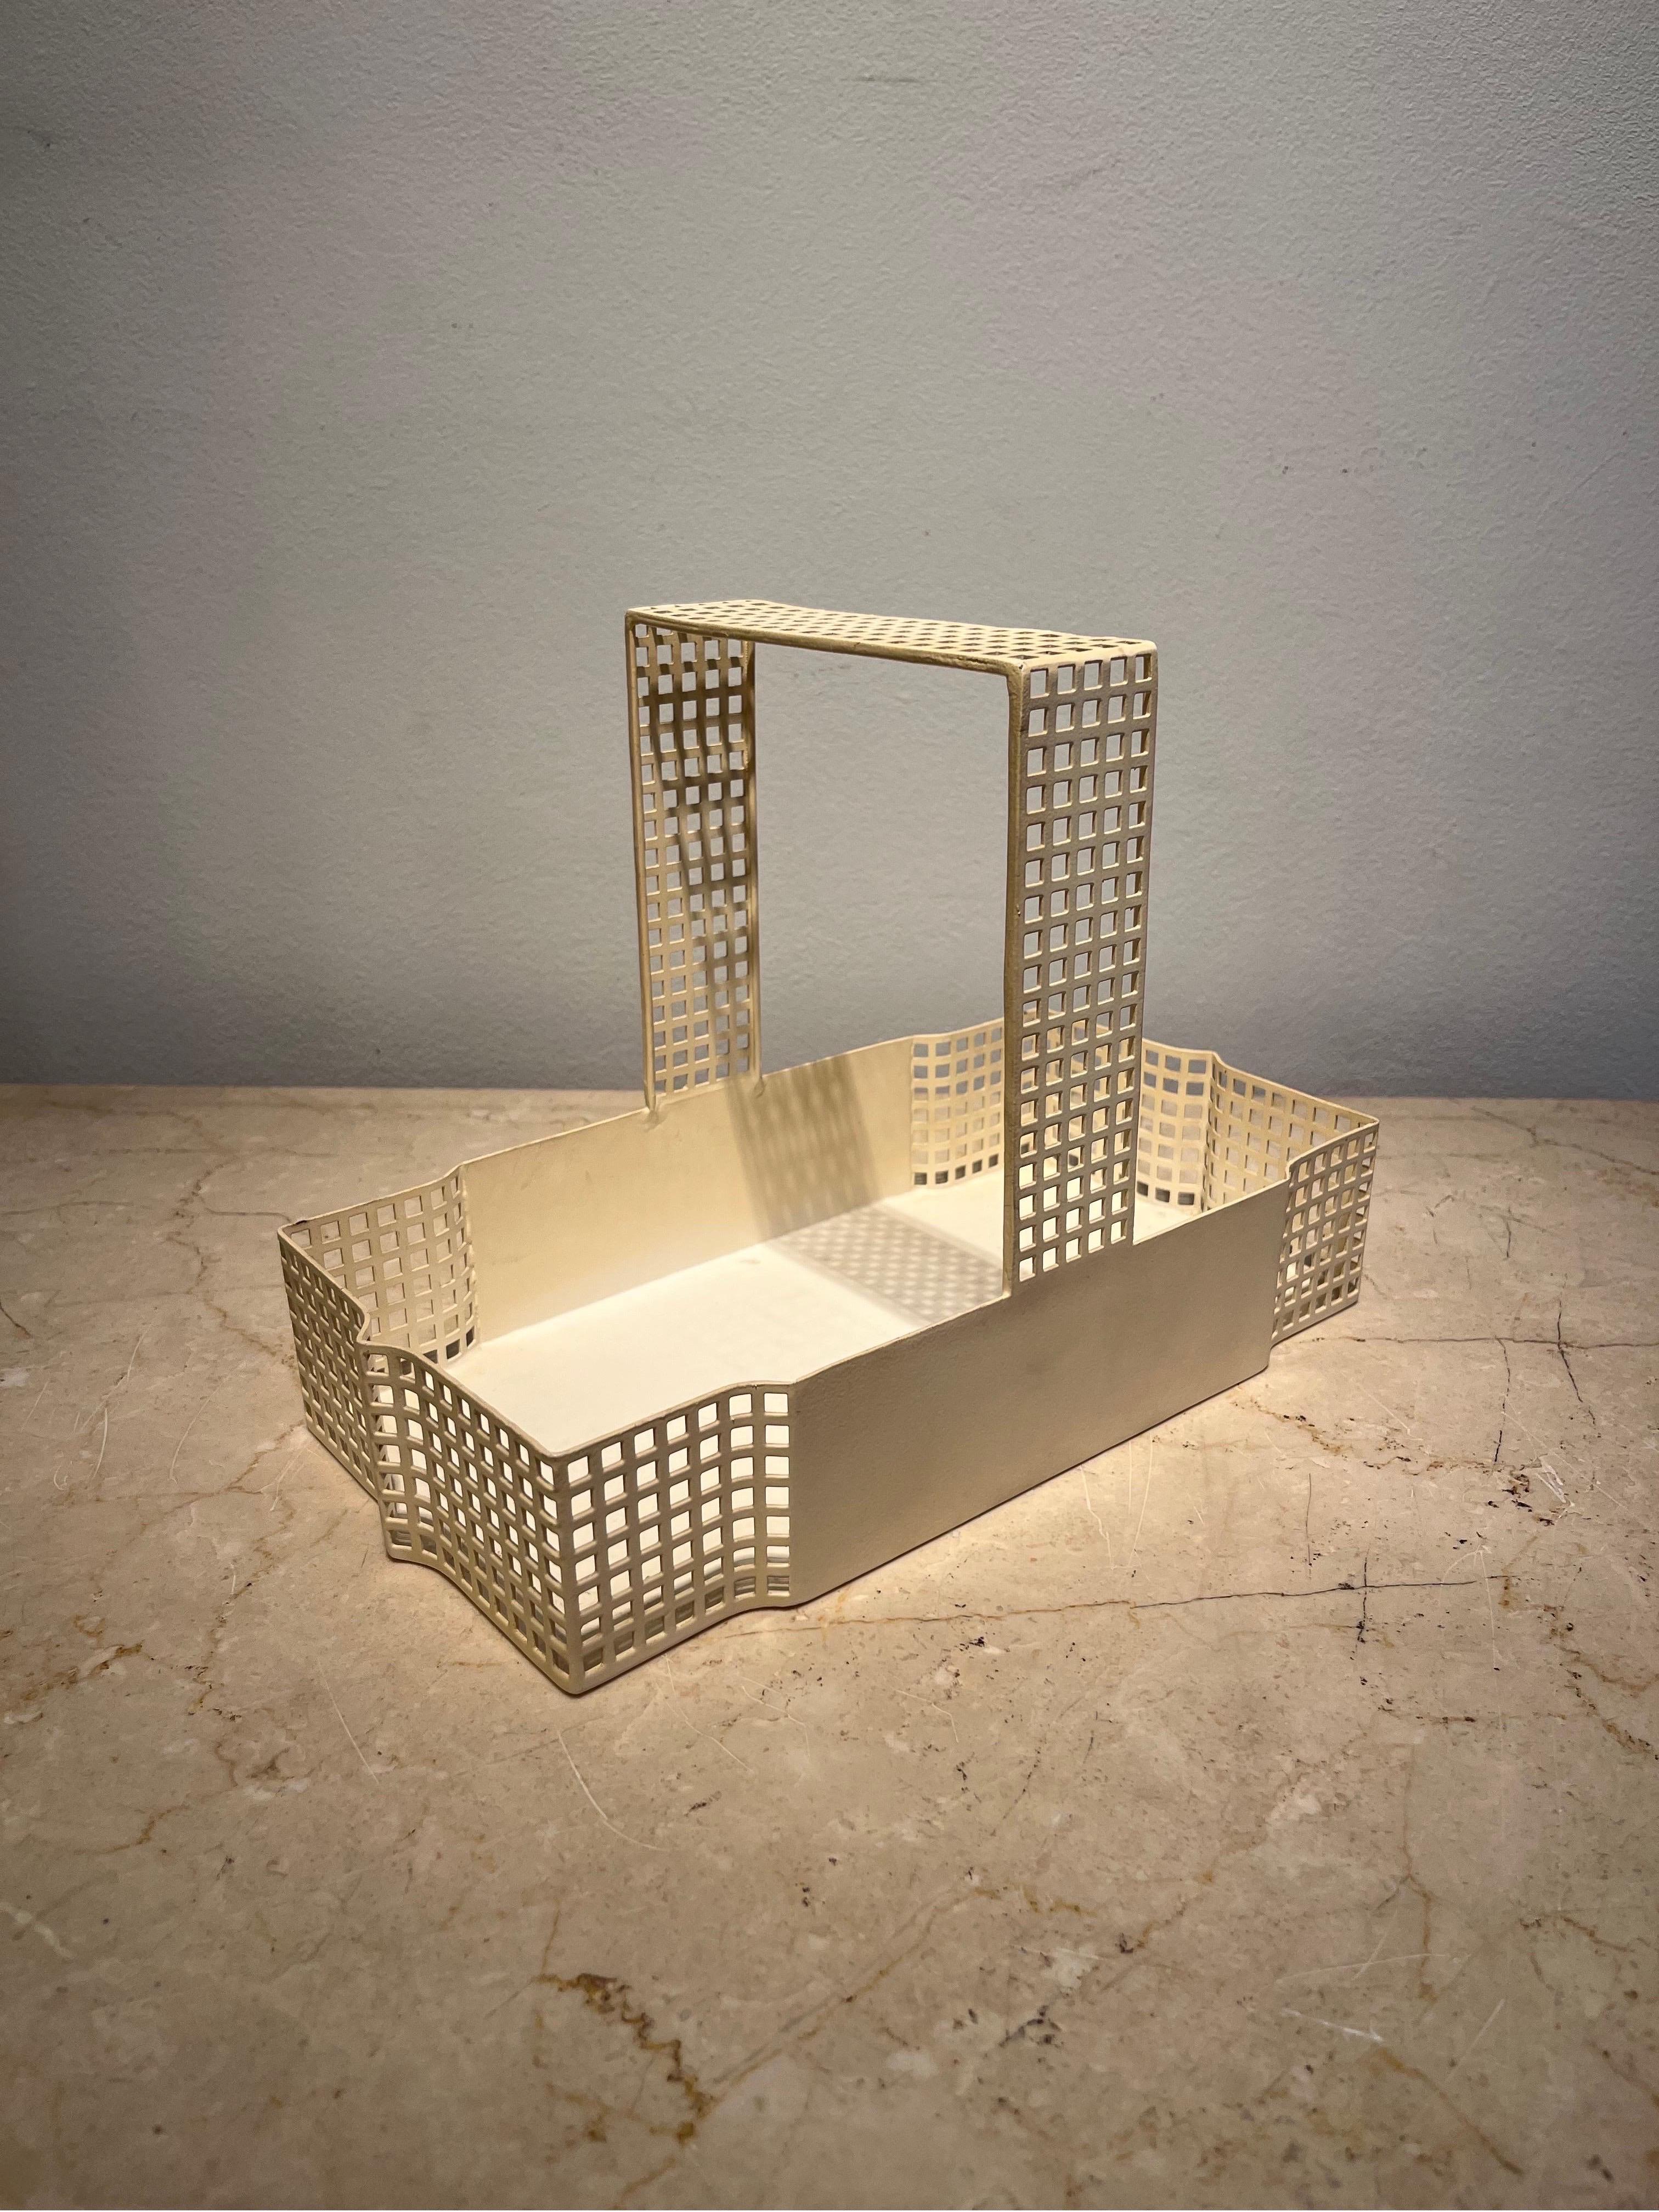 White Lacquered Metal Basket by Josef Hoffman for Bieffeplast, 1980s For Sale 4